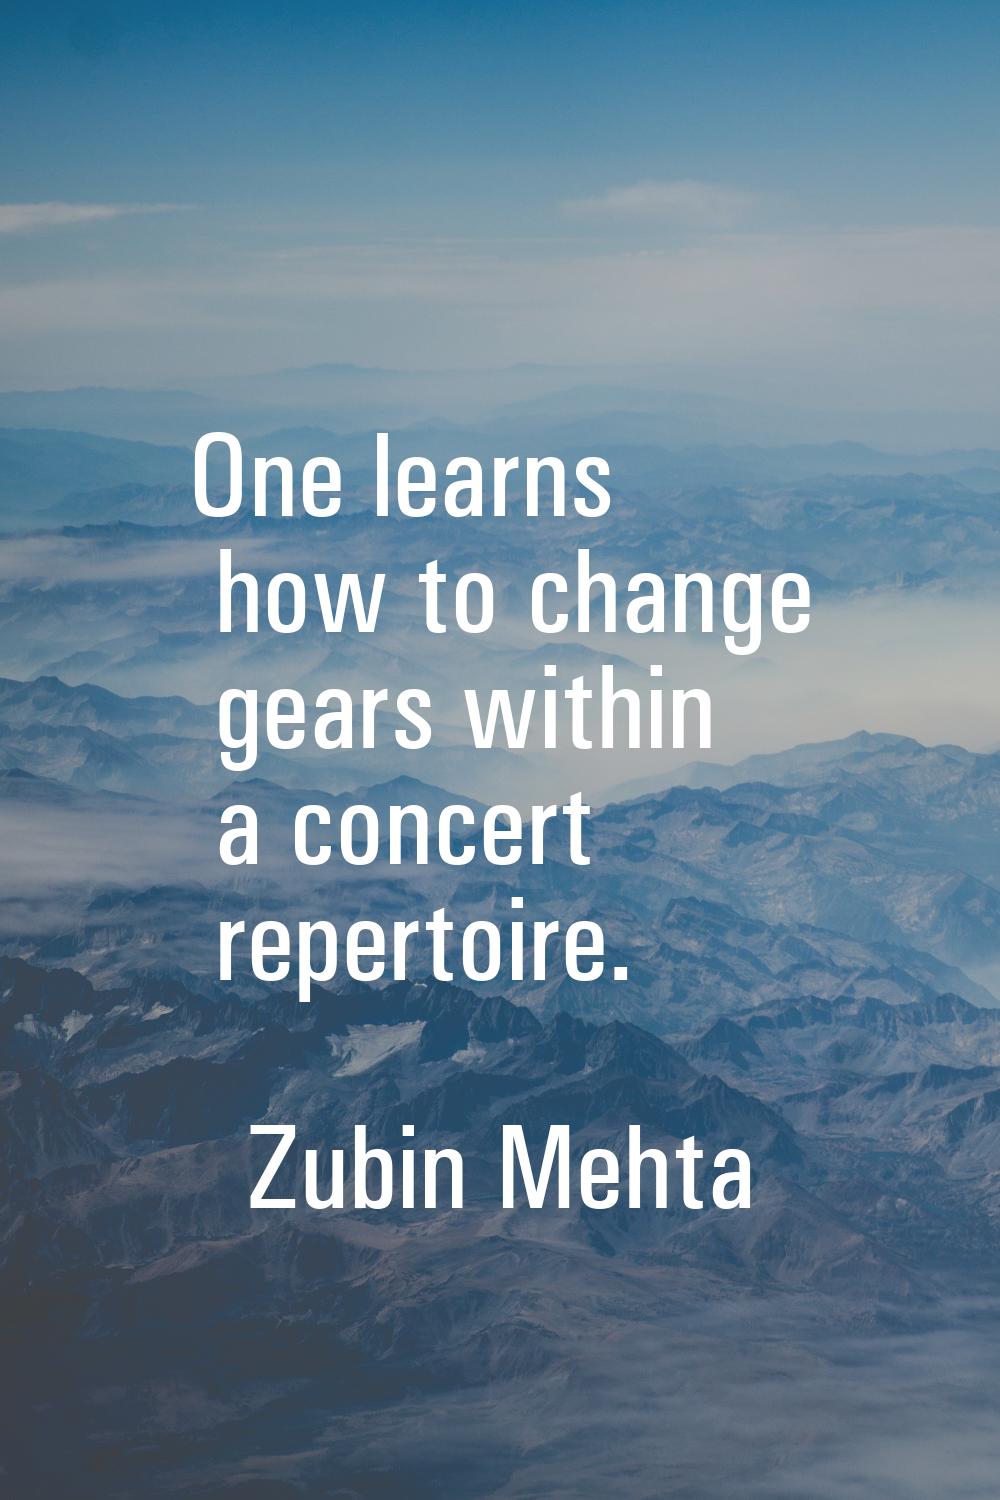 One learns how to change gears within a concert repertoire.